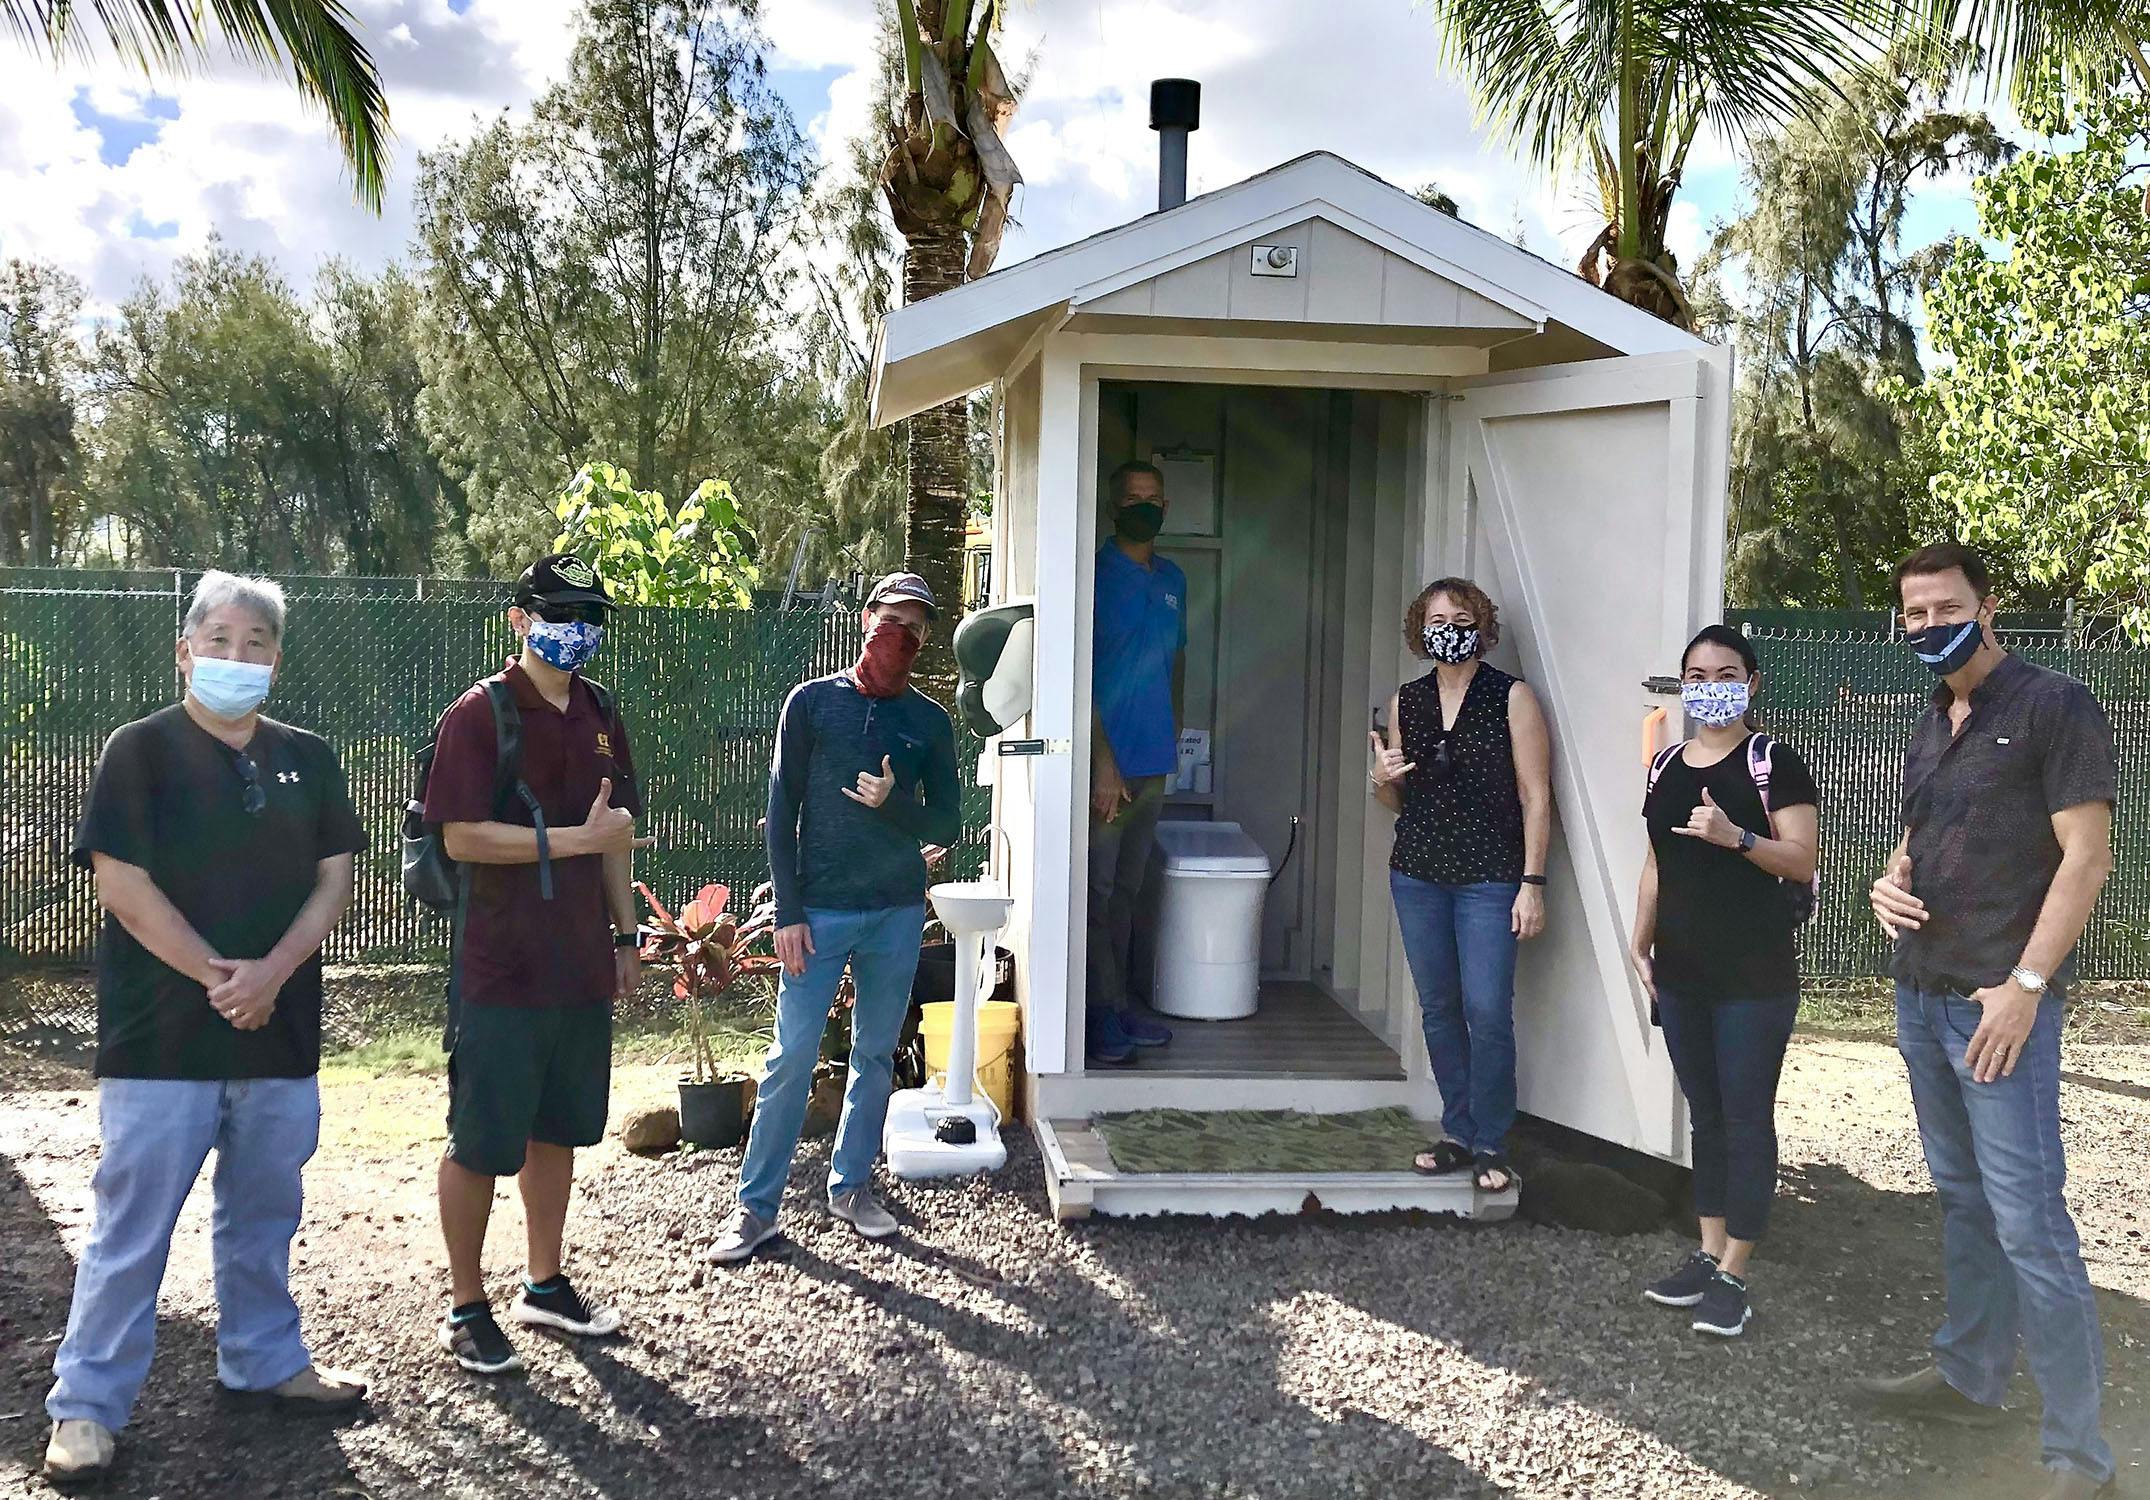 Photo of group of people standing in front of an outdoor Cinderella Incineration Toilet